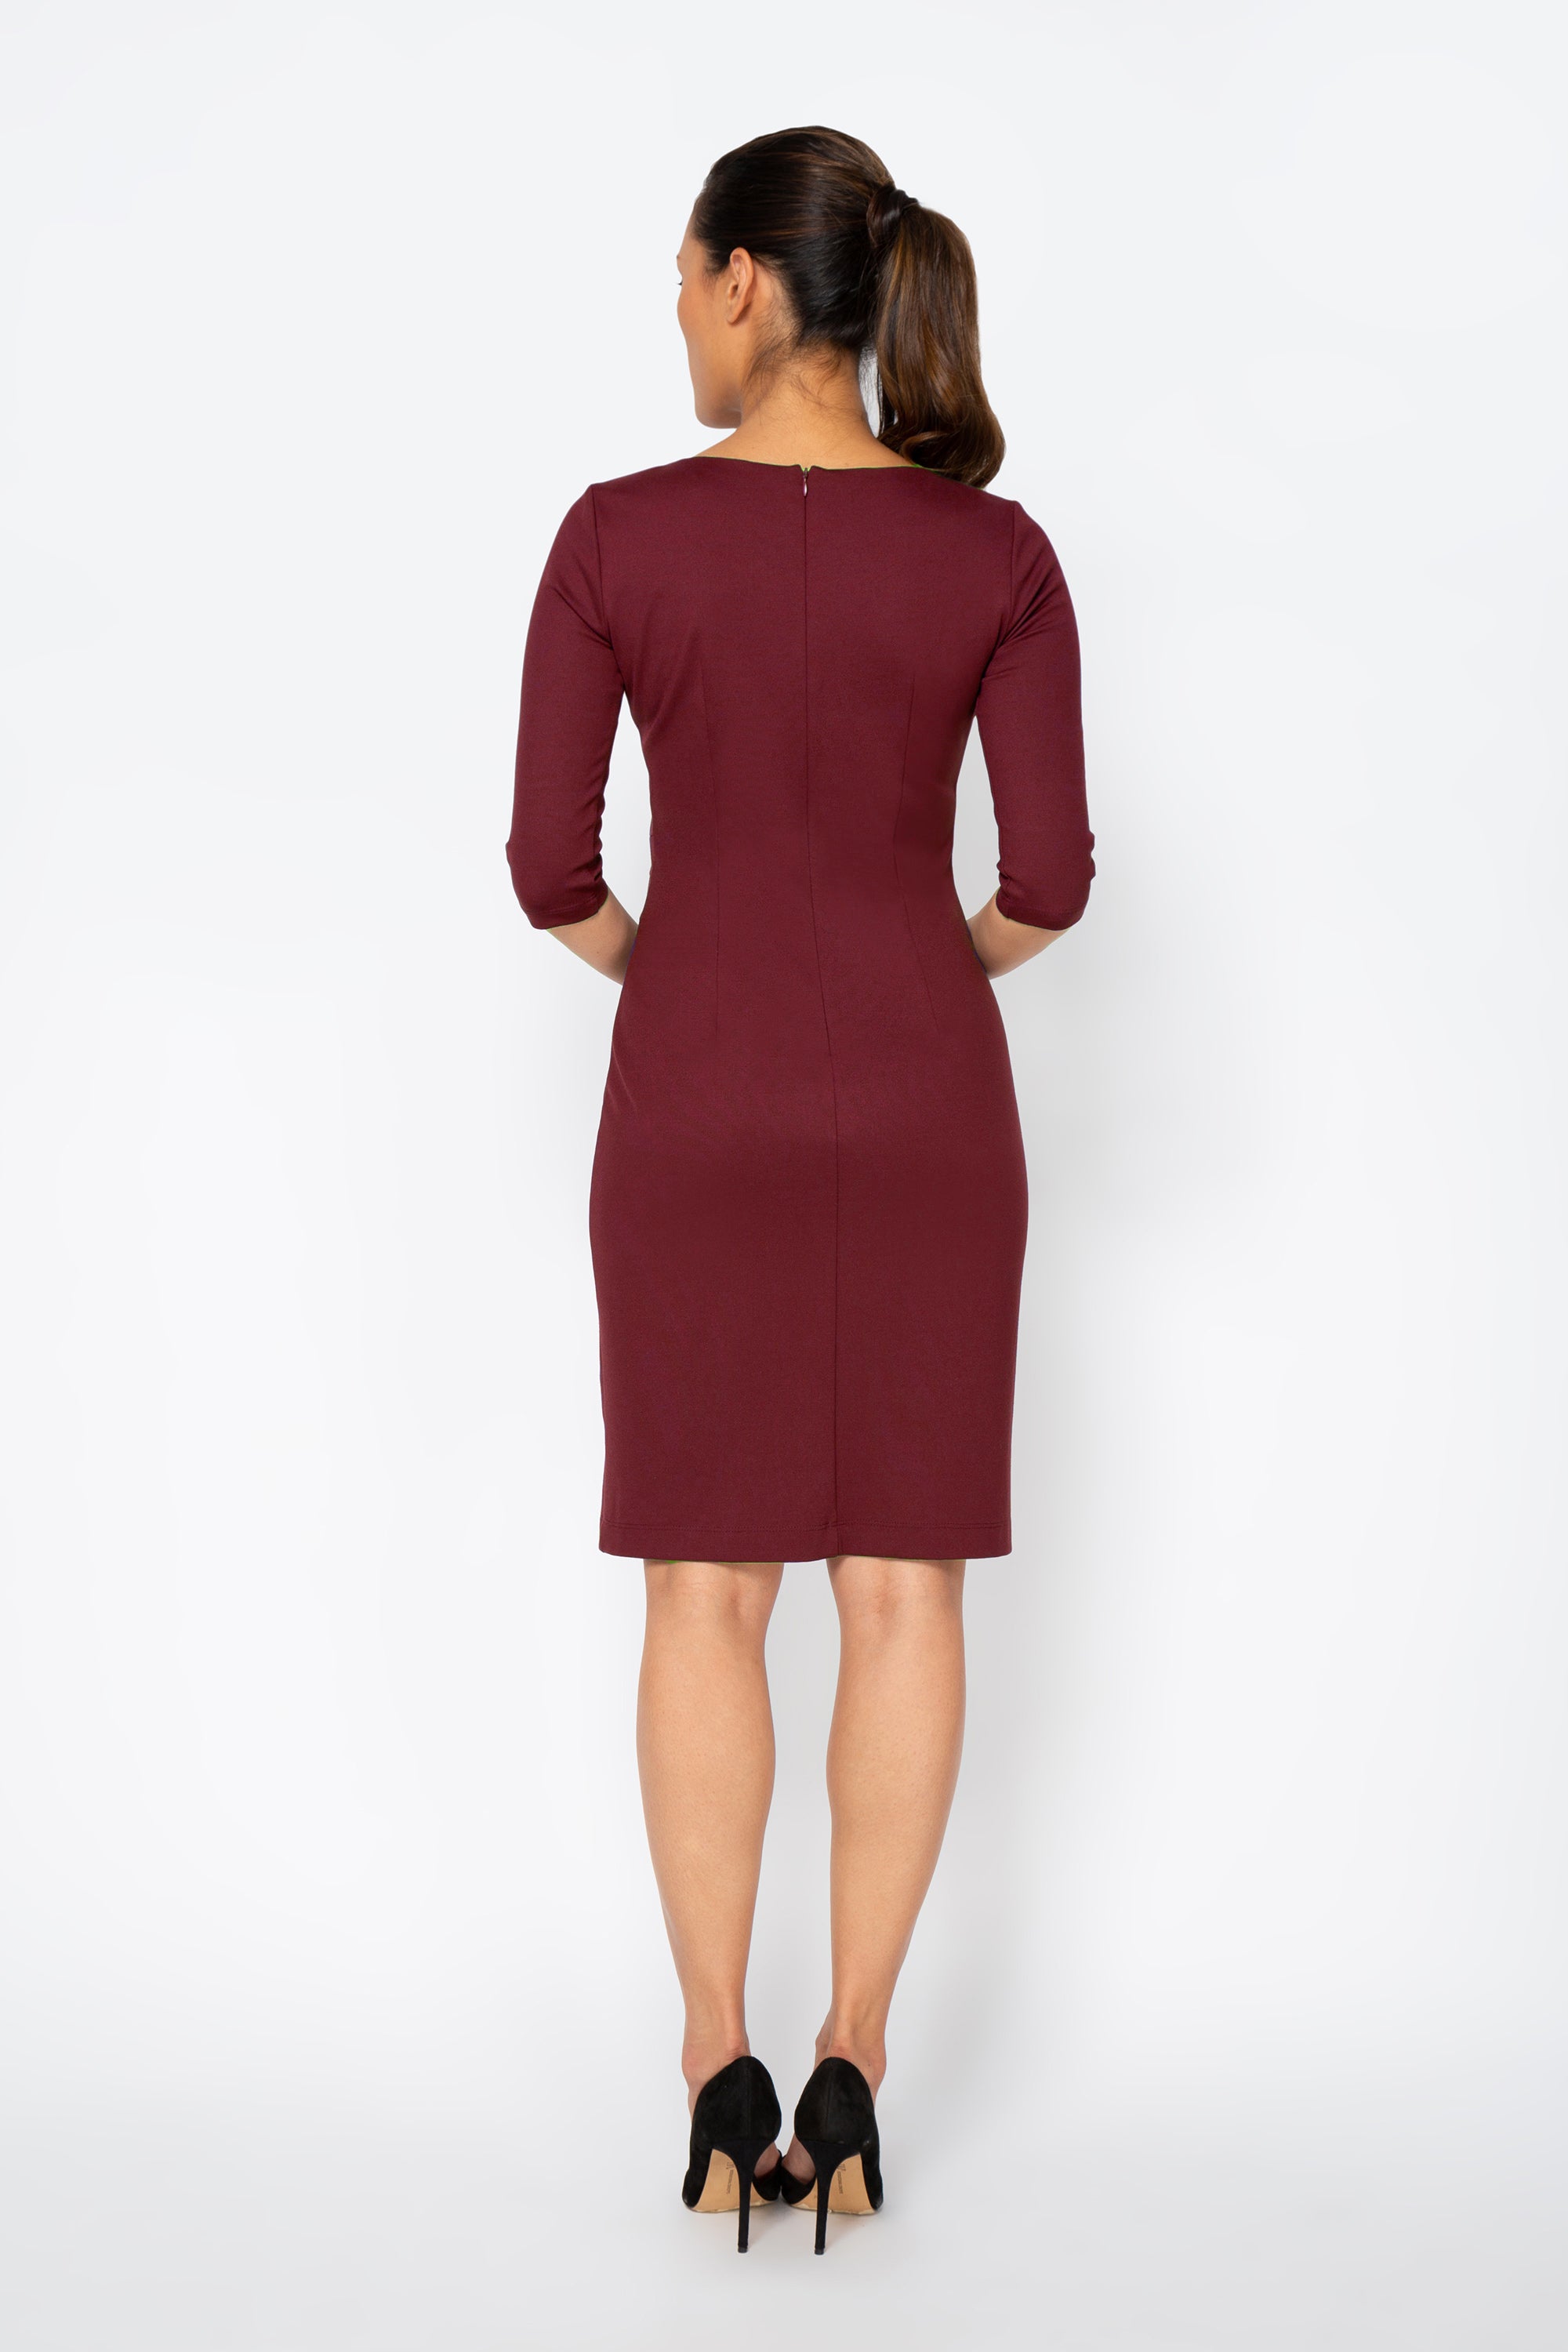 Women' Business Lydia Dress - Burgundy NORA GARDNER | OFFICIAL STORE for work and office